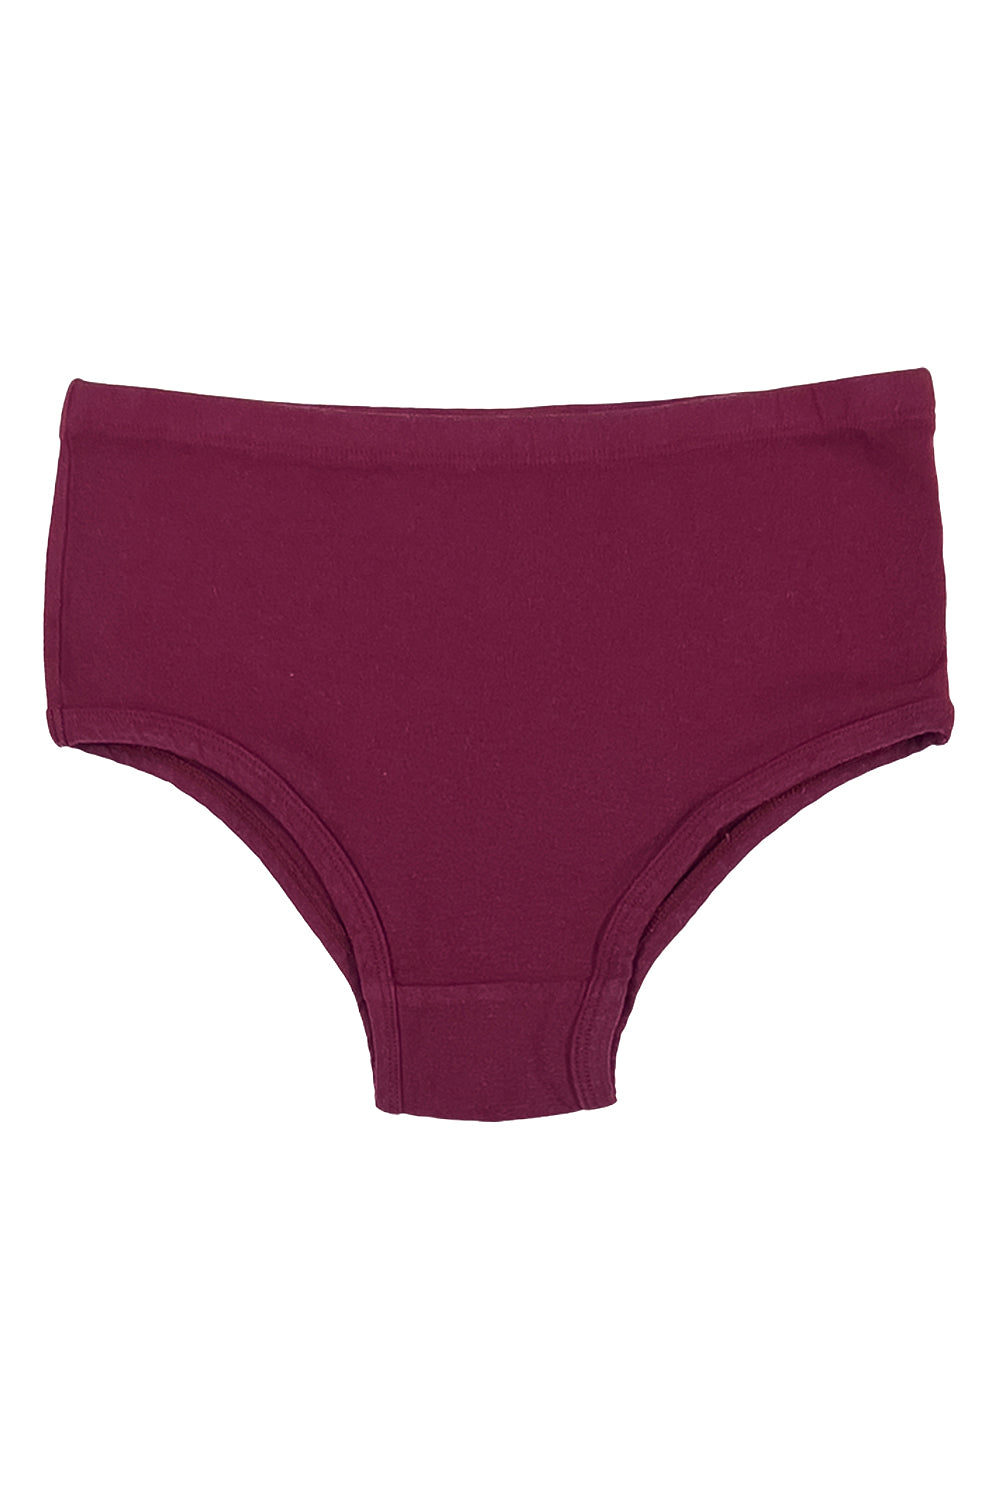 Girl's Organic Cotton Hipster Underwear | Kid Panties | Naturally dyed |  Madder | Chemical-free & Spandex-free